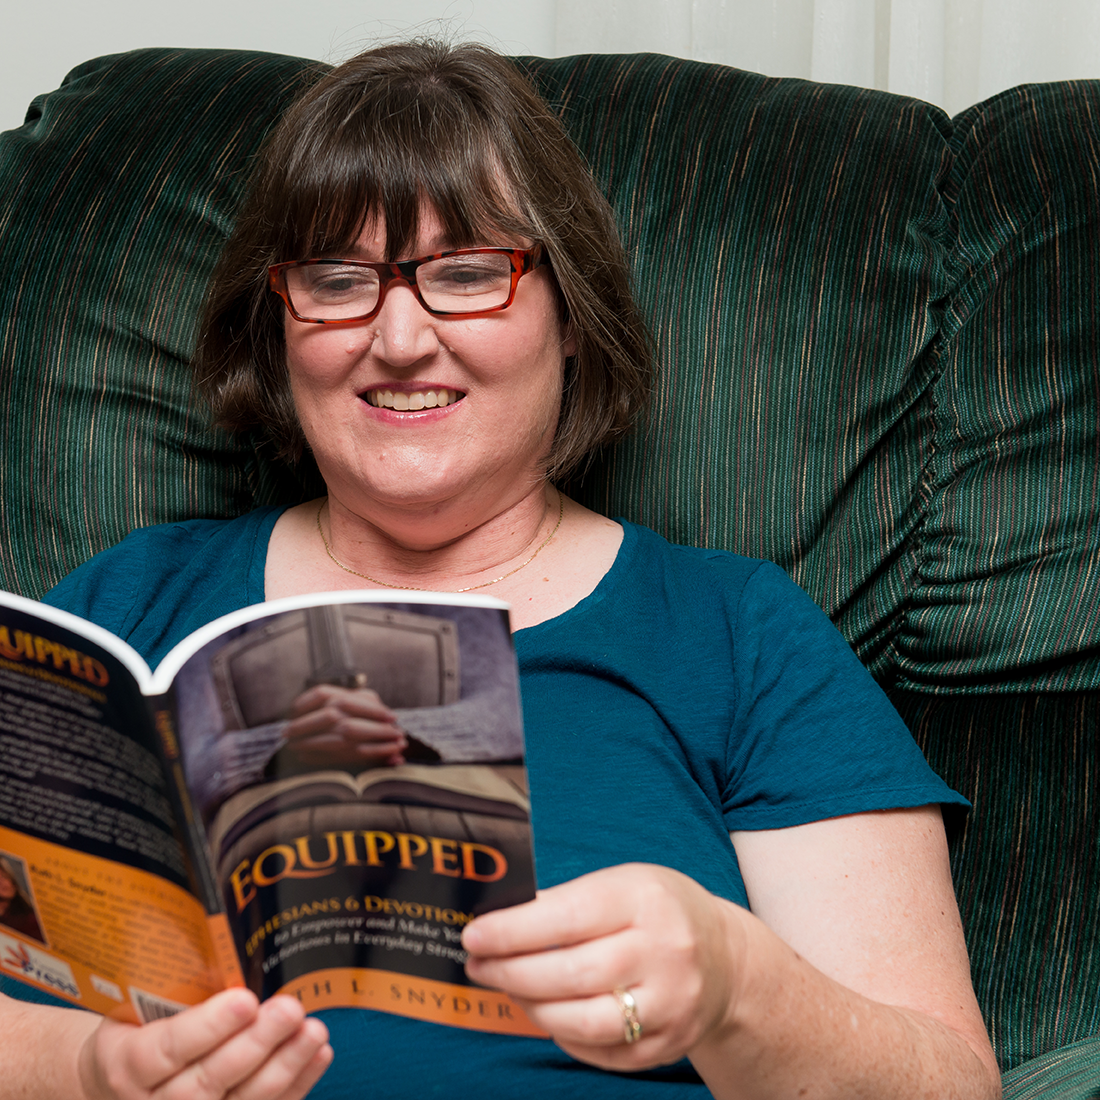 Ruth L. Snyder reading Equipped